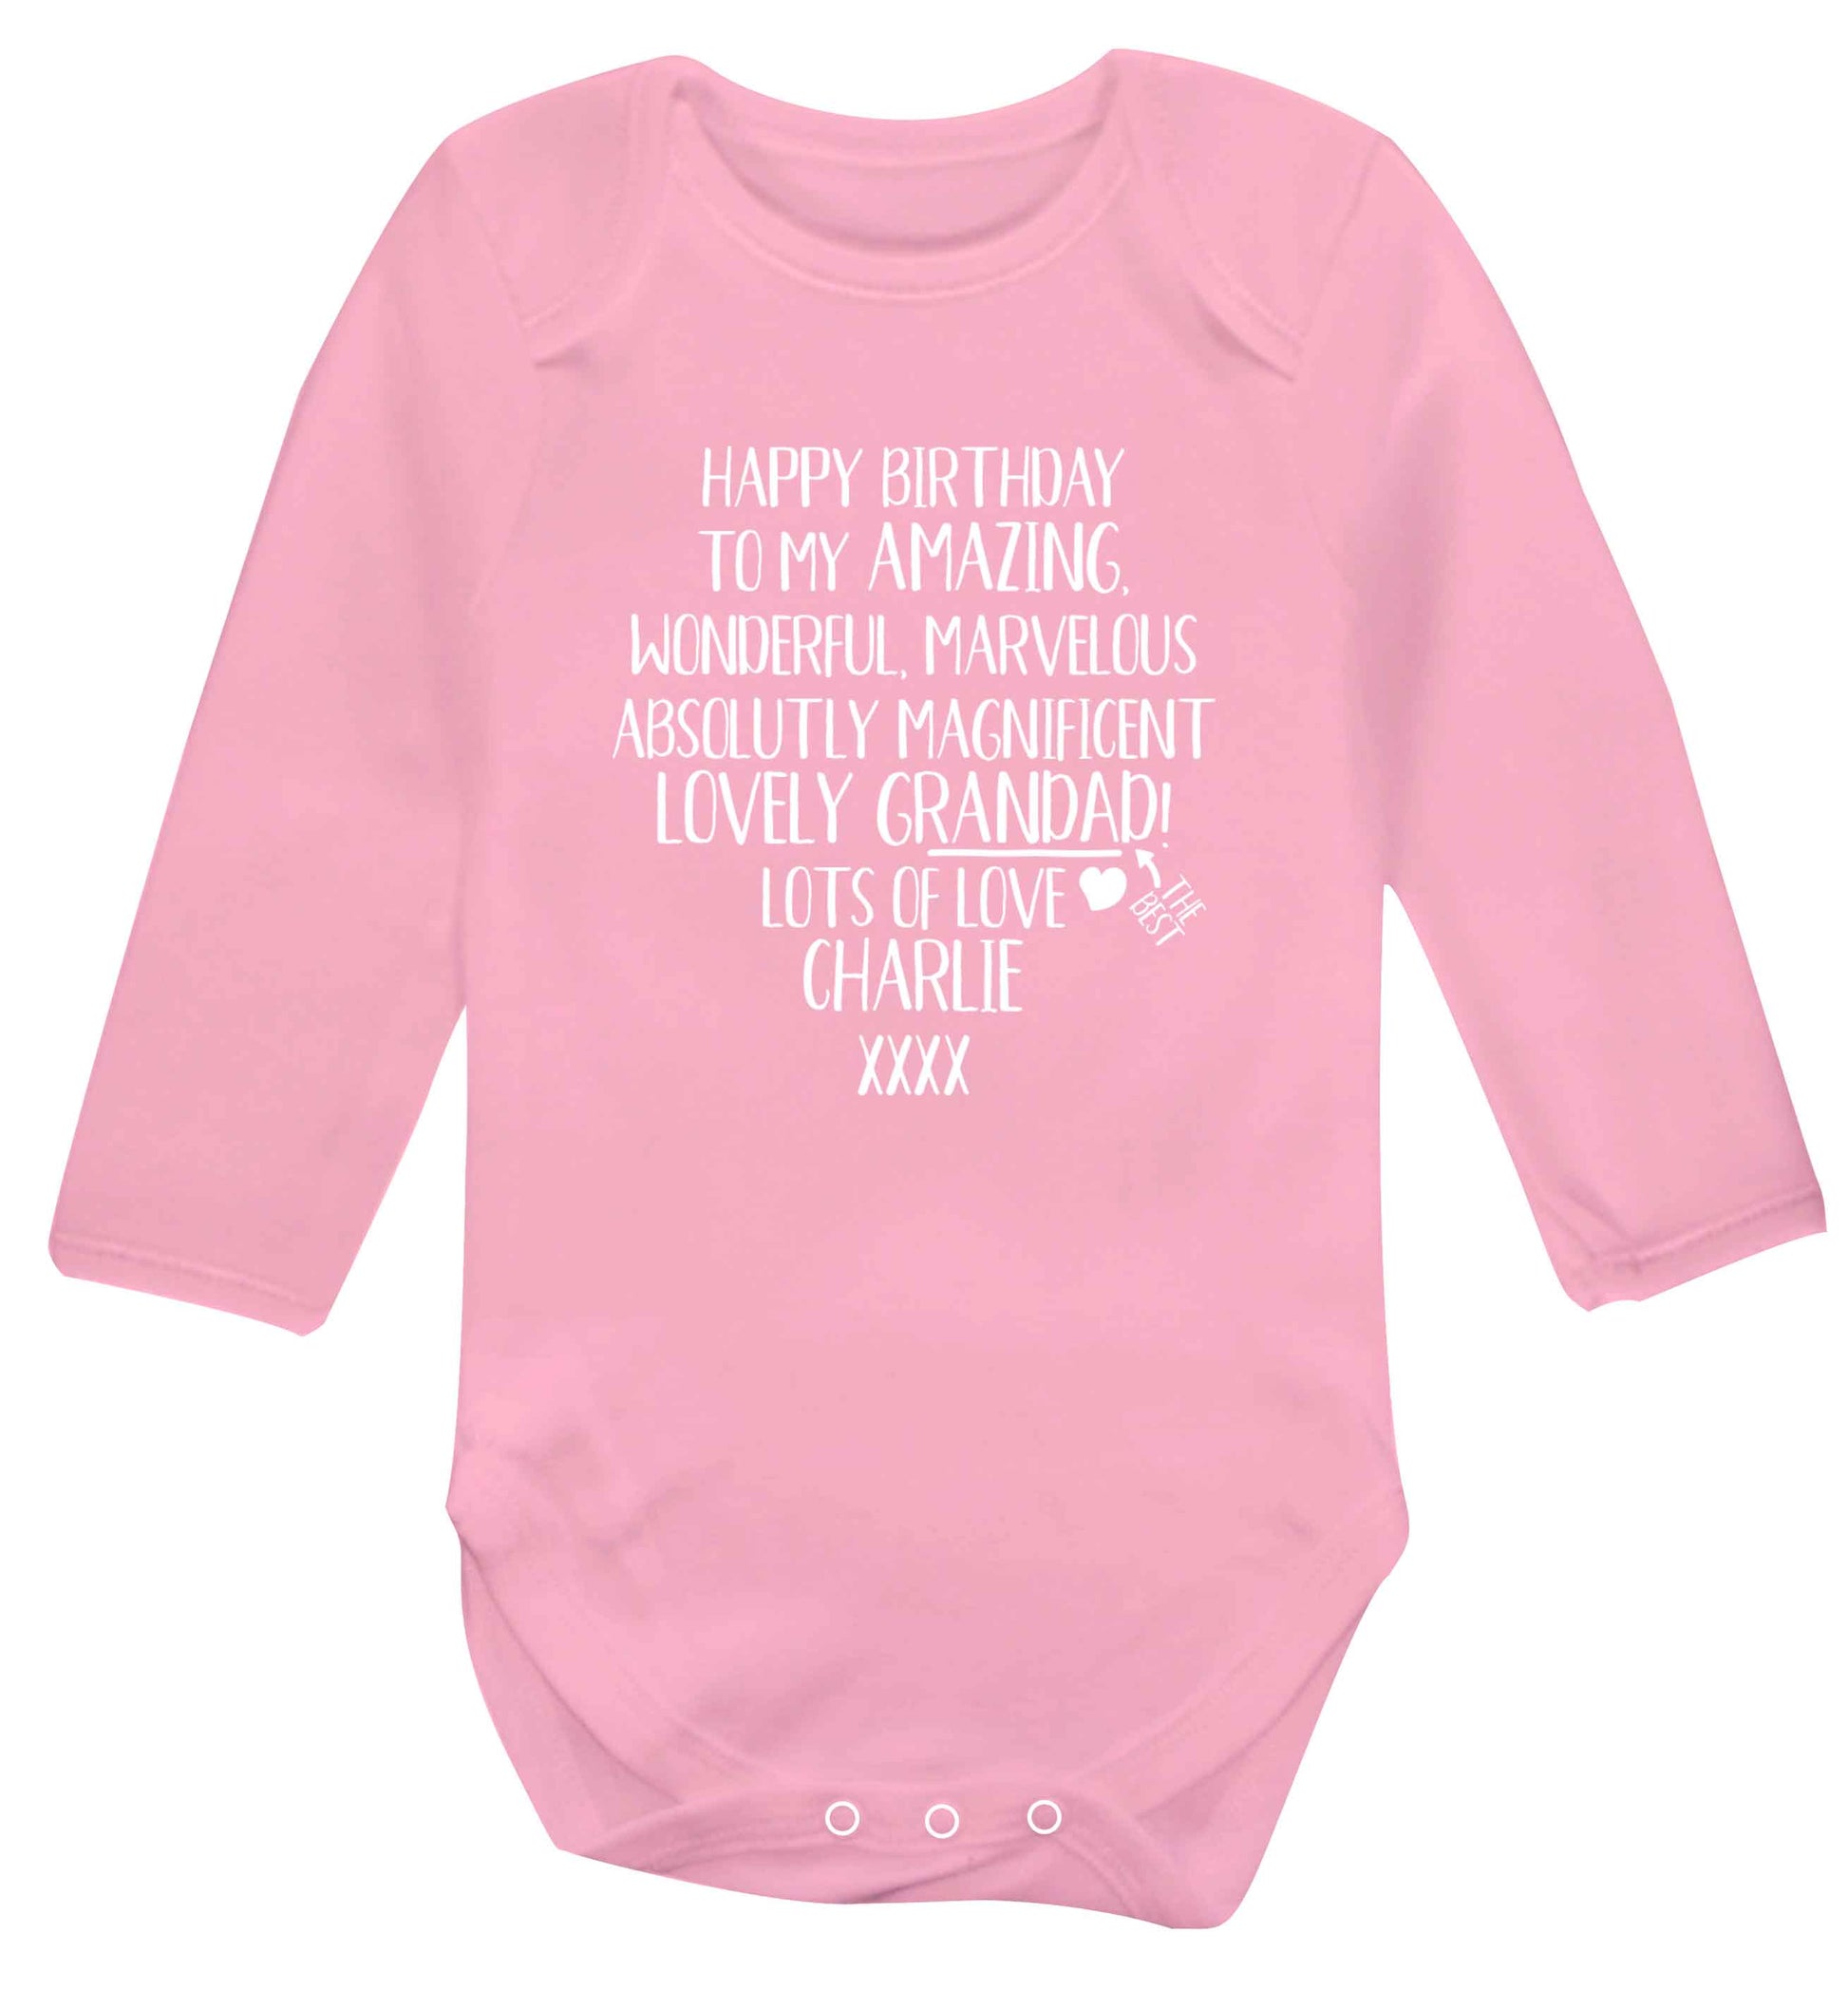 Personalised happy birthday to my amazing, wonderful, lovely grandad Baby Vest long sleeved pale pink 6-12 months